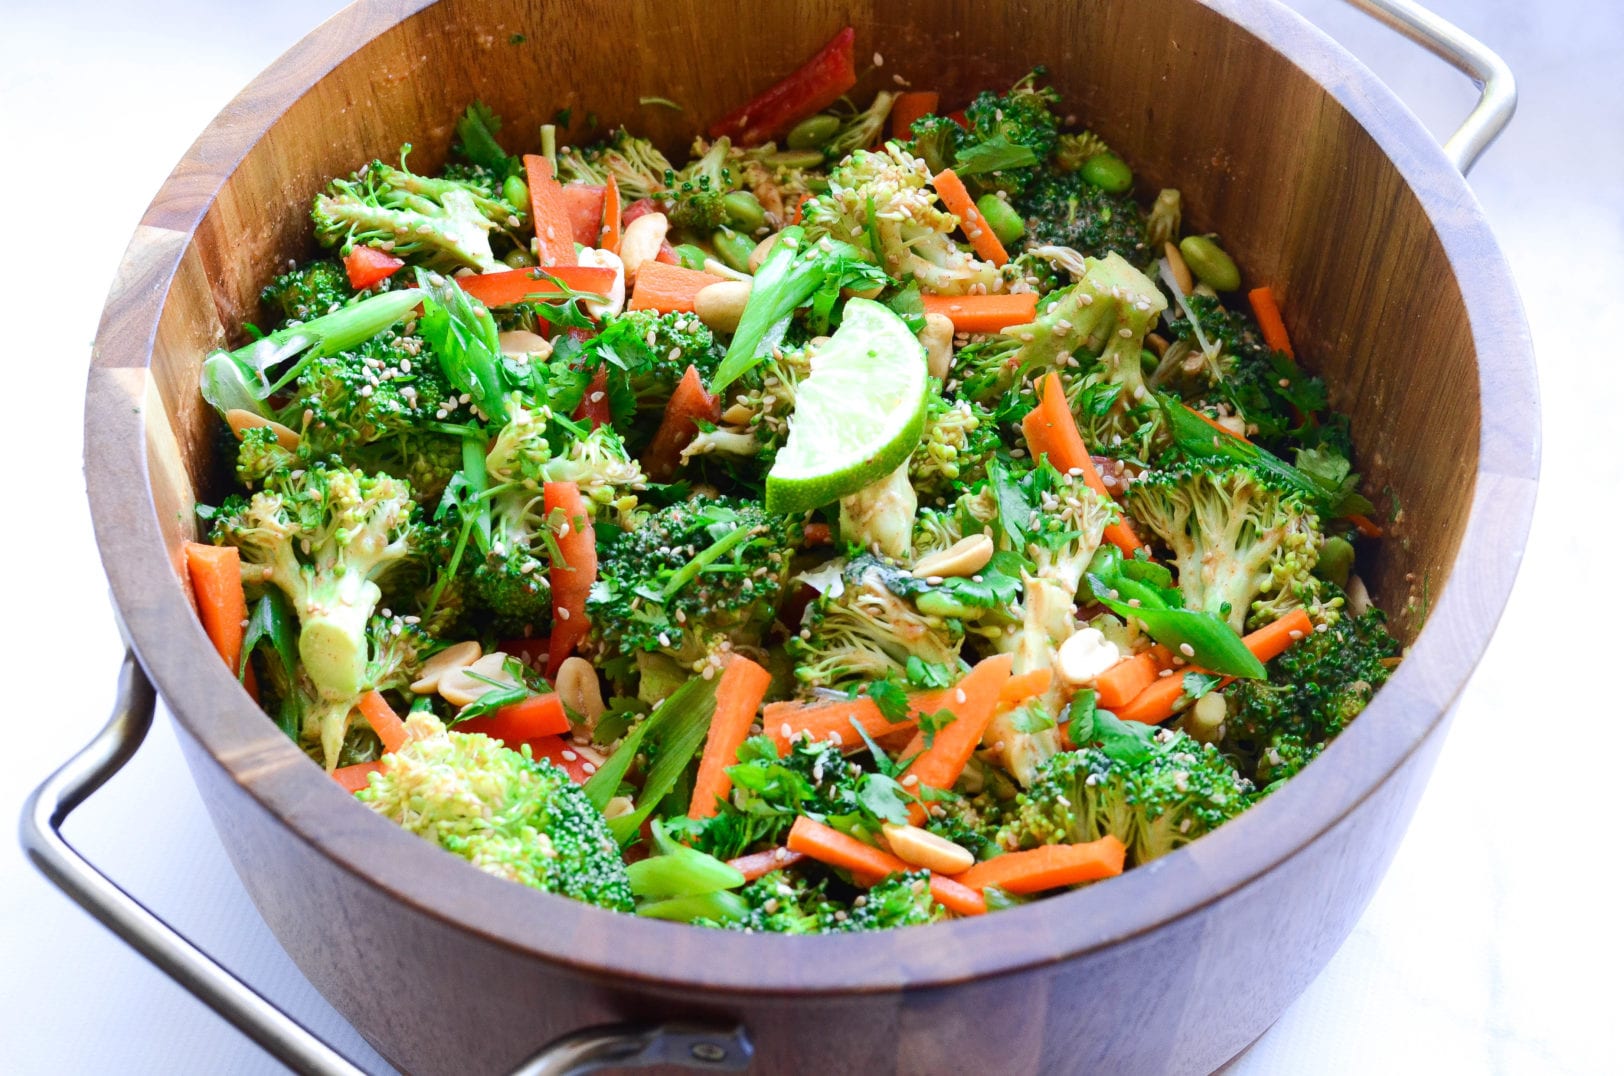 Thai Broccoli Salad With Spicy Almond Dressing